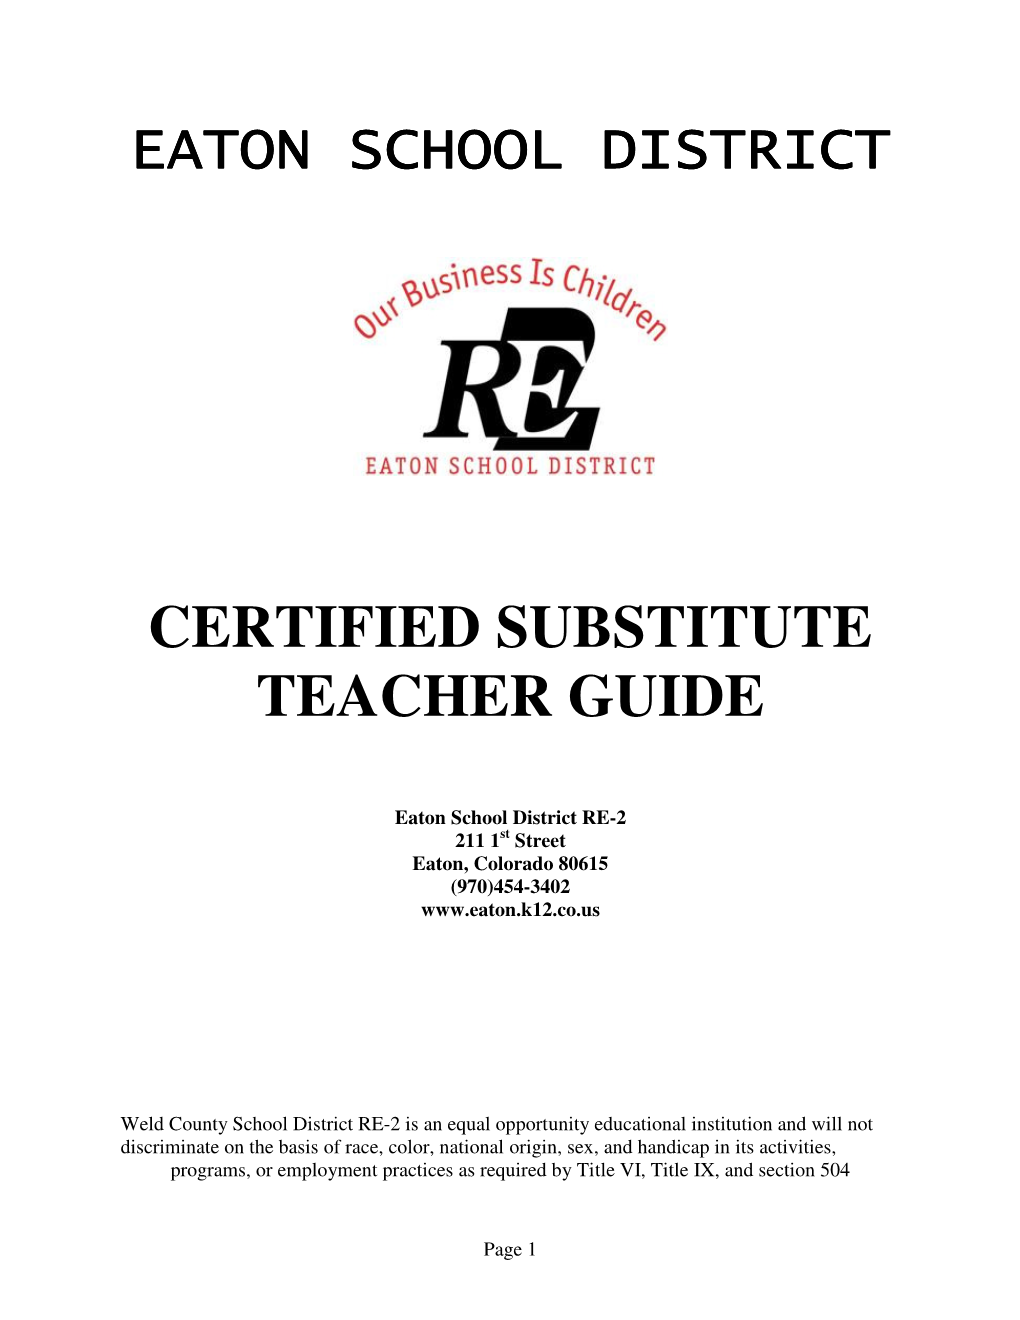 Eaton School District Certified Substitute List, You Will Receive Additional Aesop Information